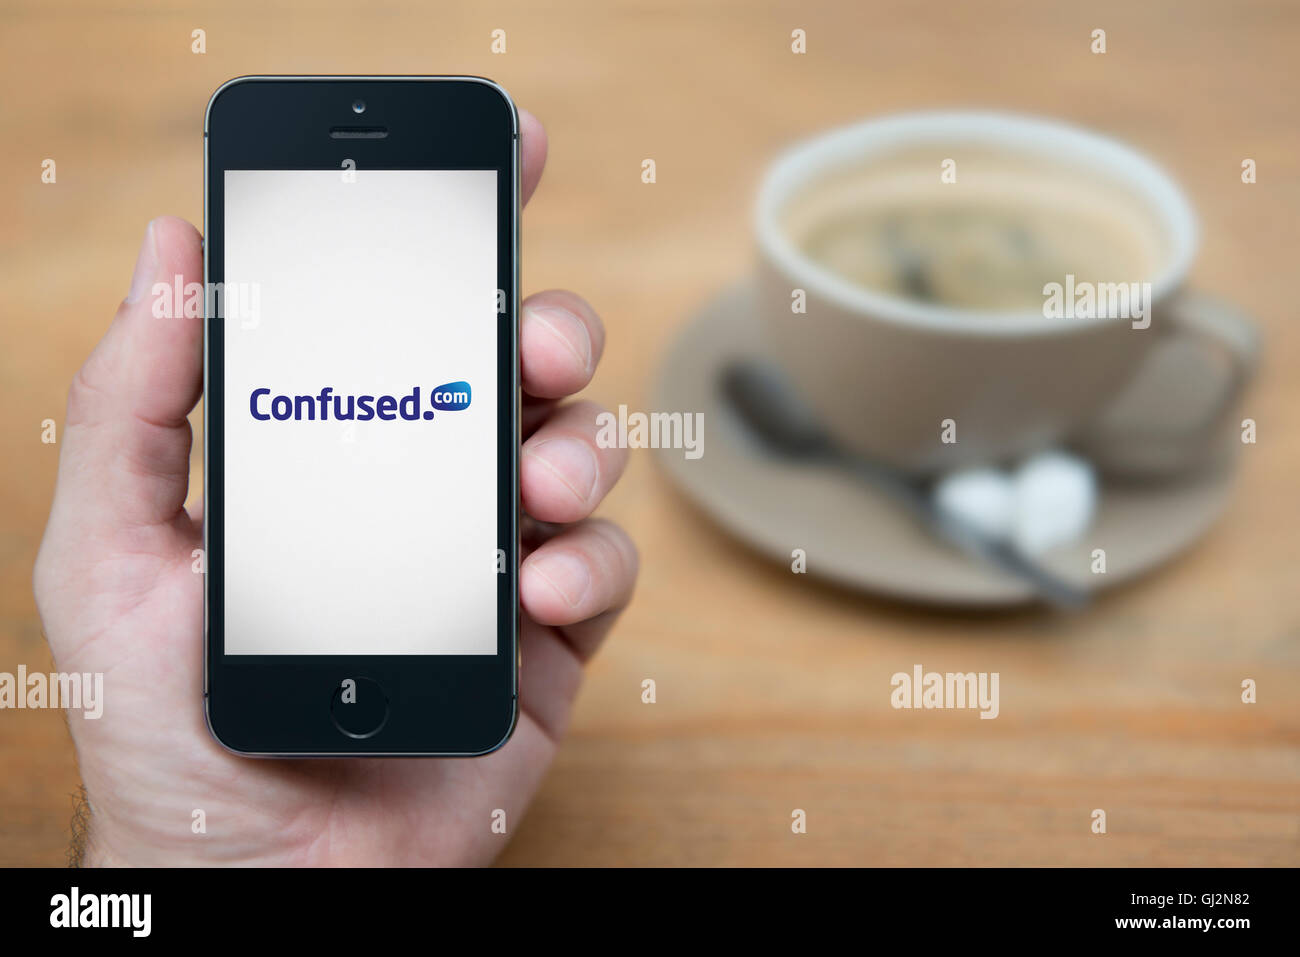 A man looks at his iPhone which displays the Confused.com logo, while sat with a cup of coffee (Editorial use only). Stock Photo